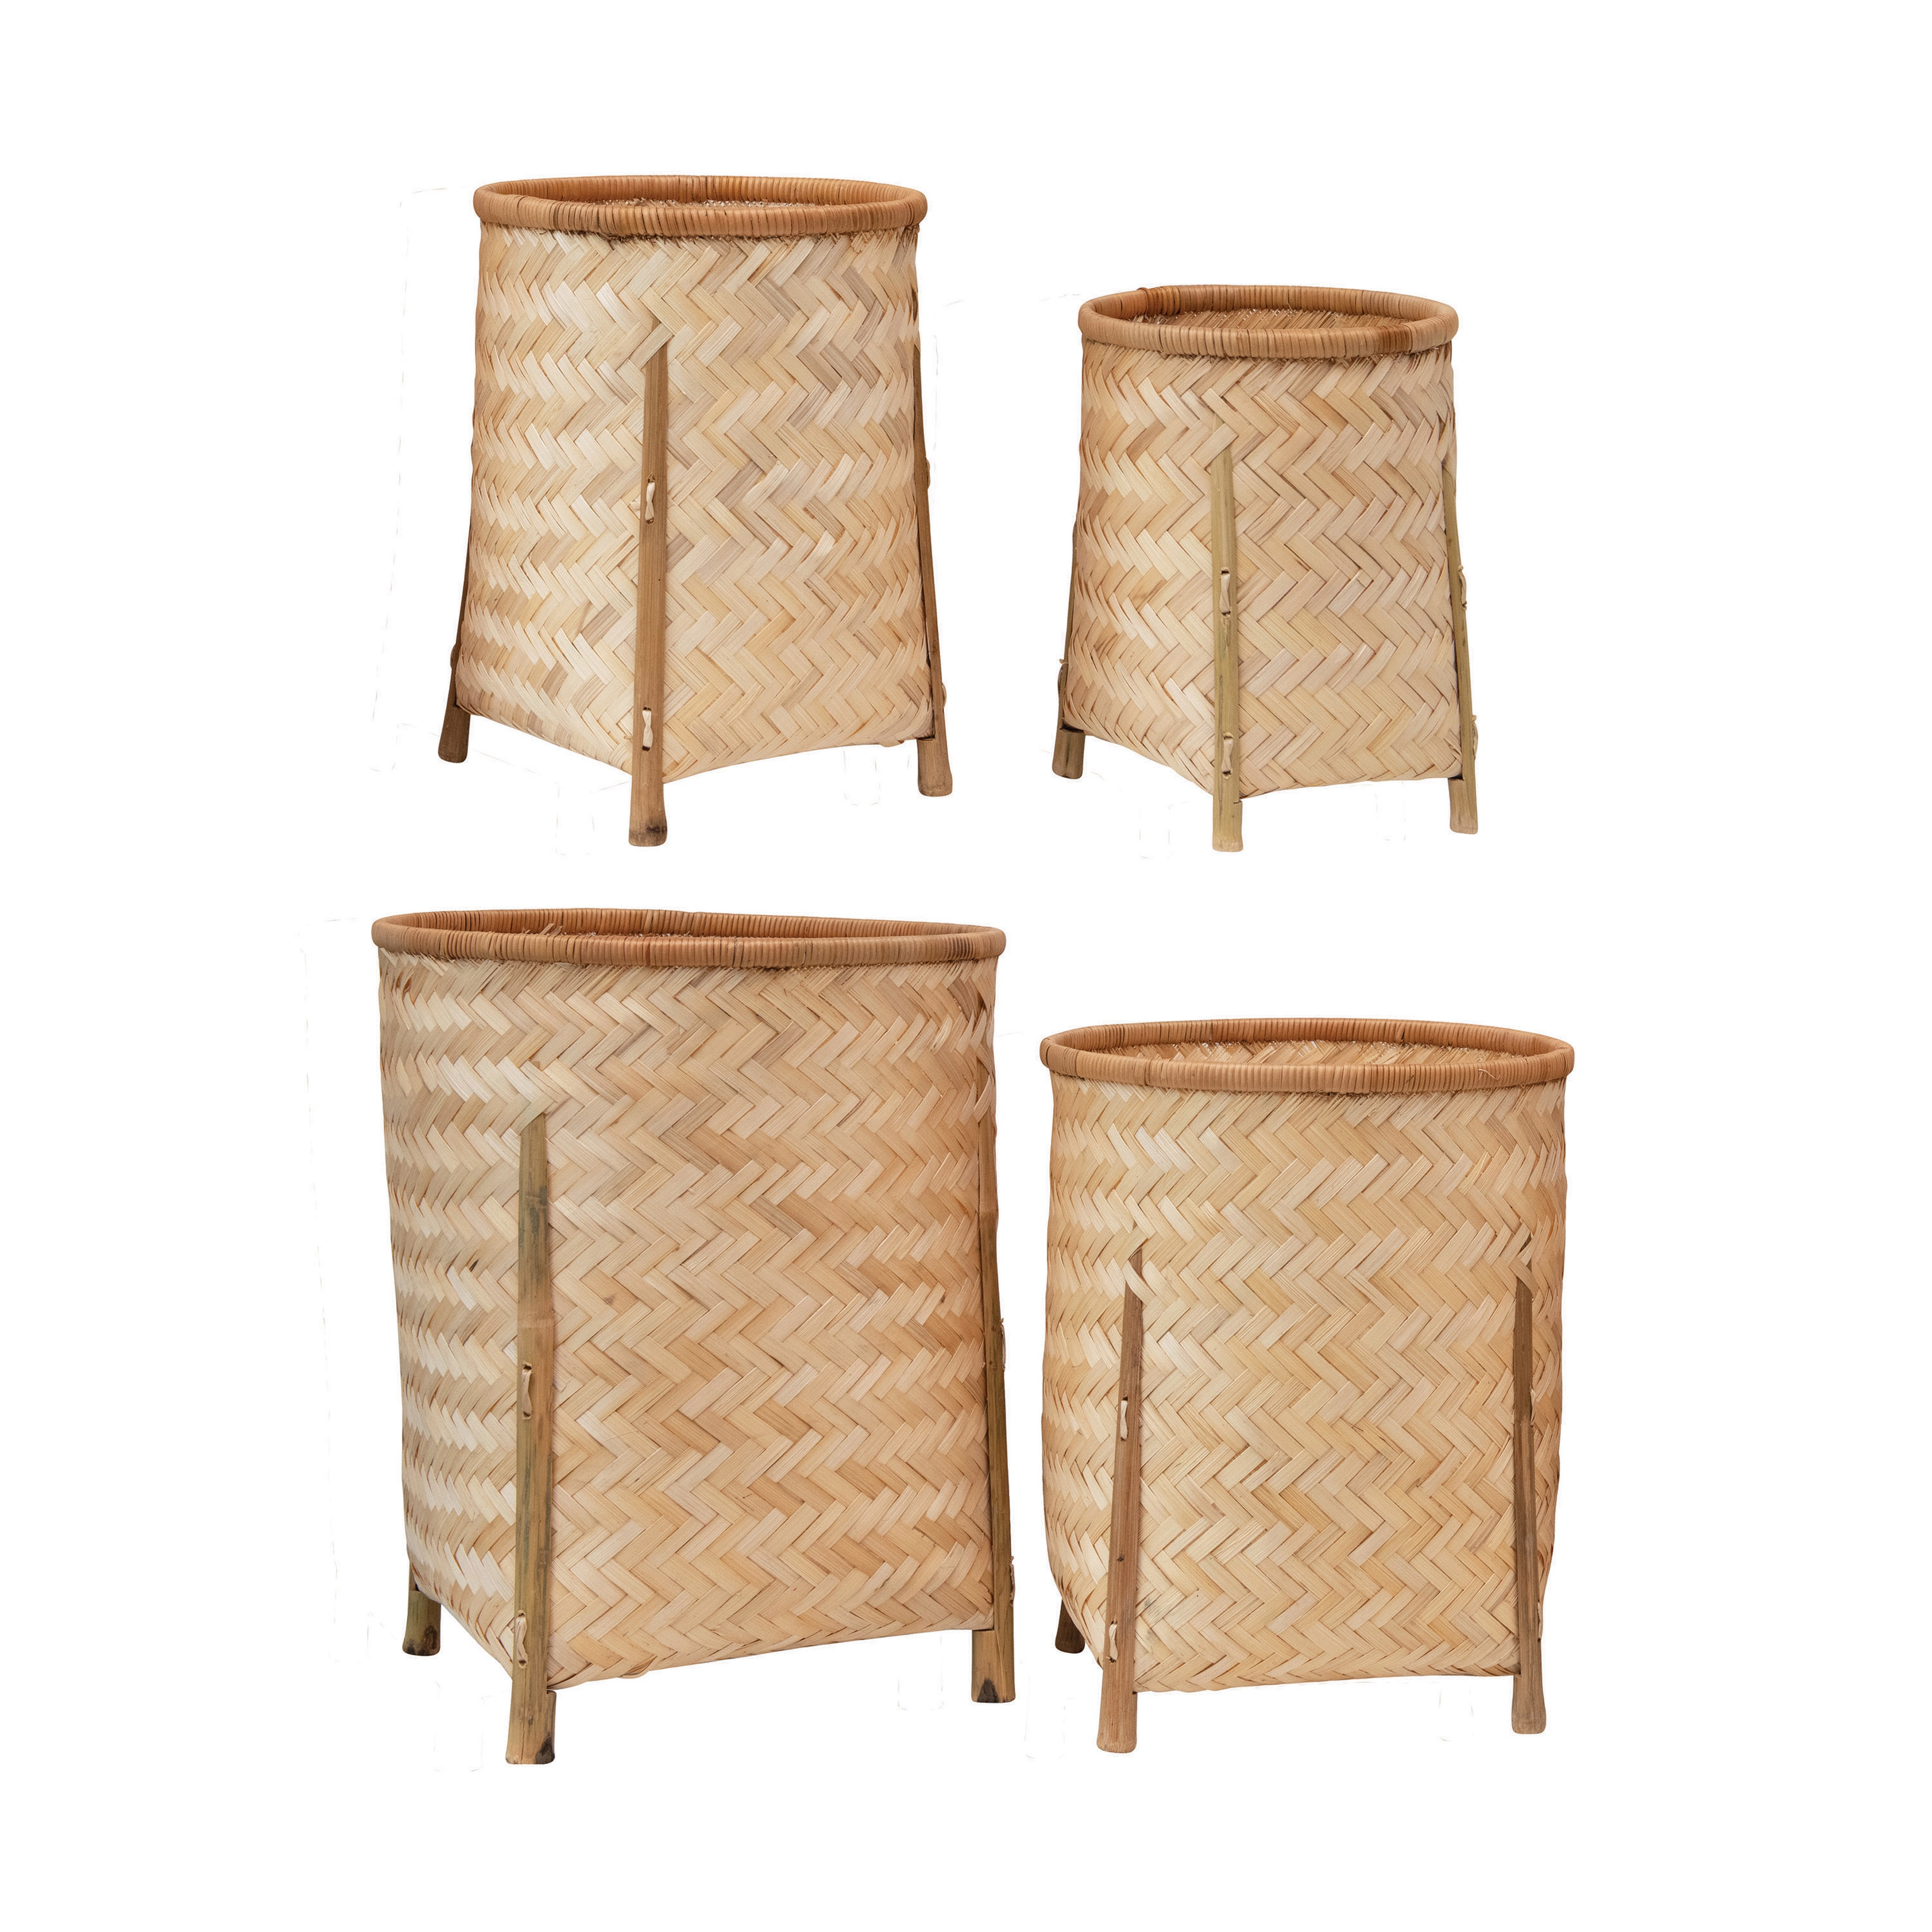 Woven Bamboo Baskets with Legs, Natural, Set of 4 - Image 0